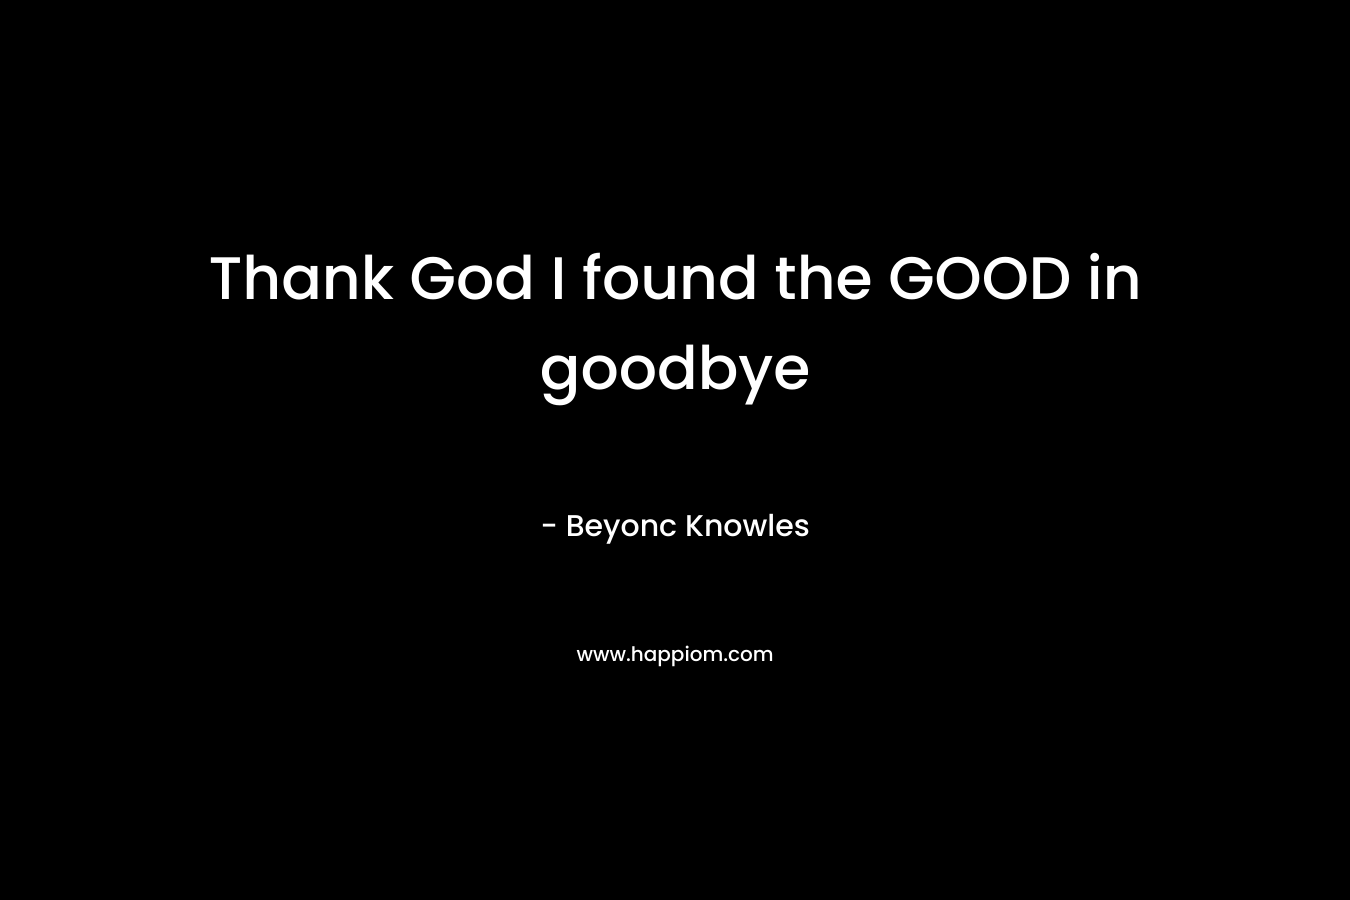 Thank God I found the GOOD in goodbye – Beyonc Knowles